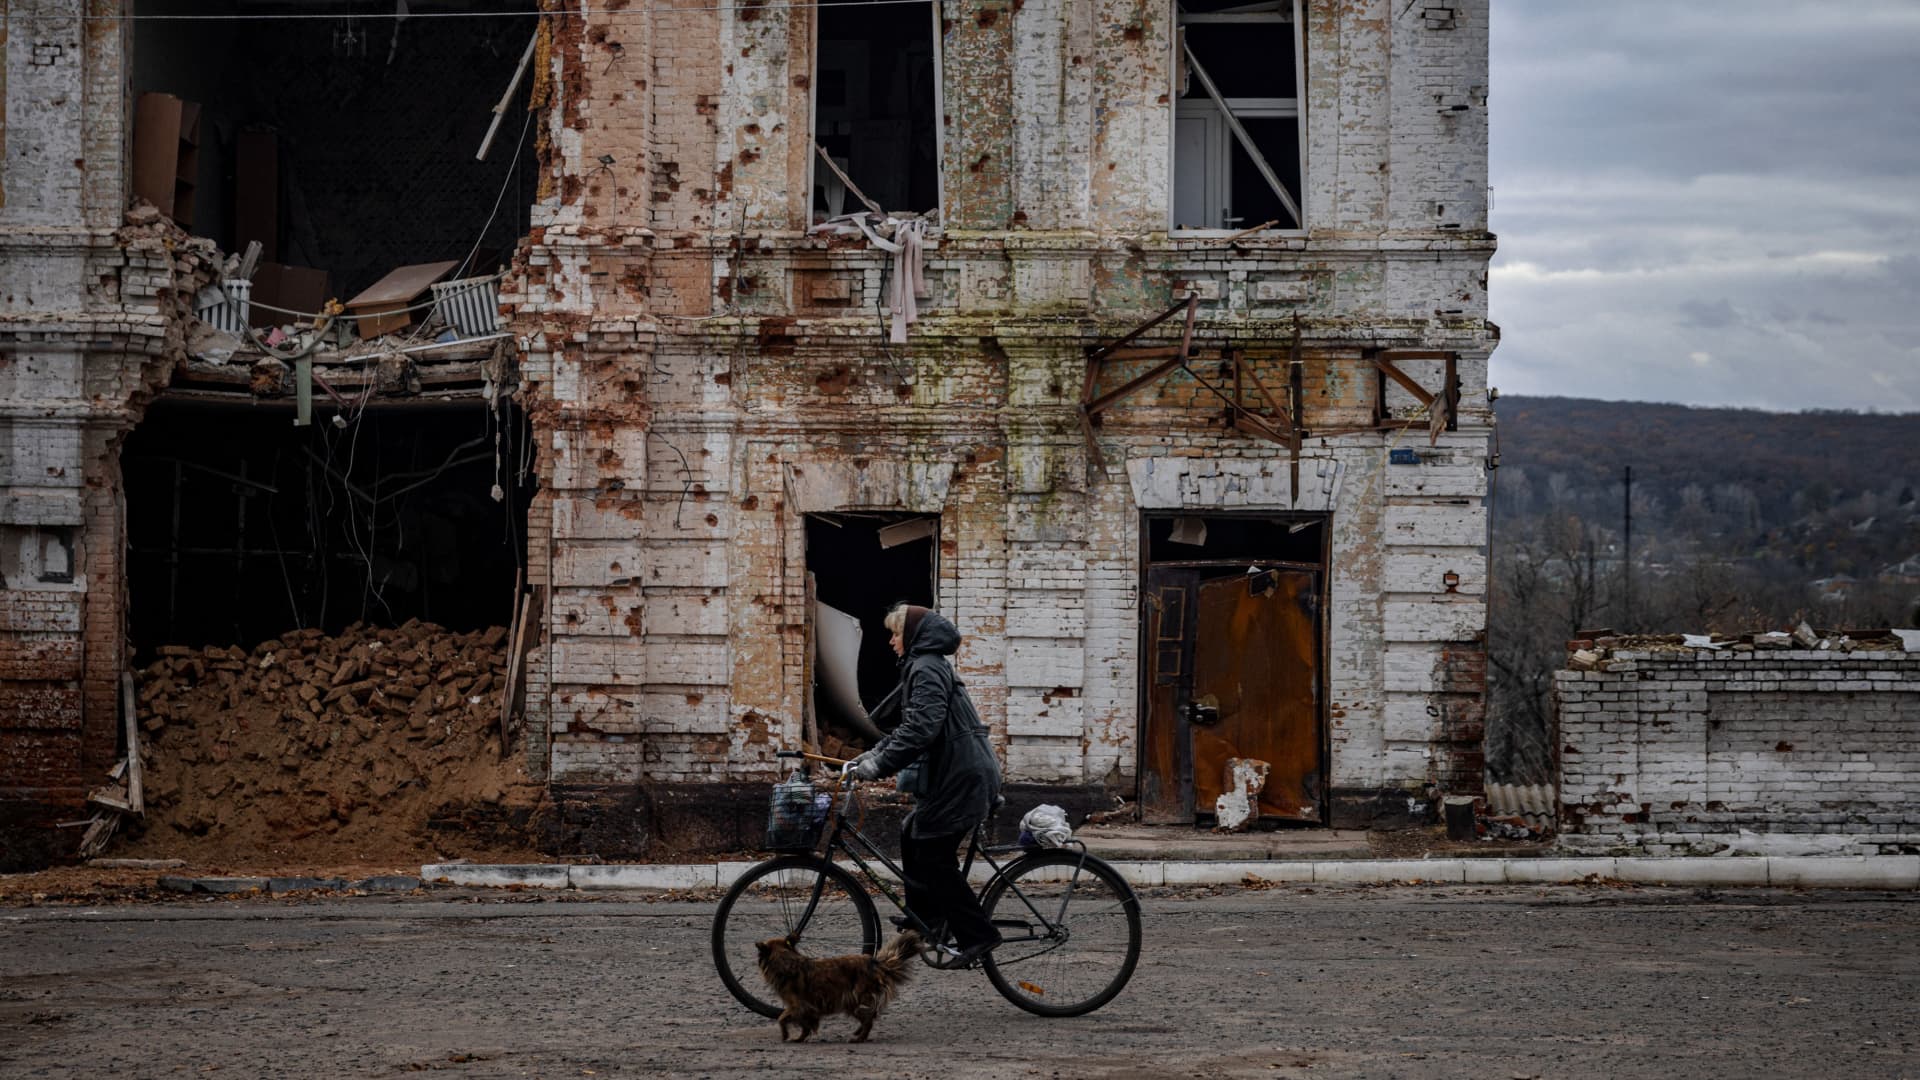 A woman rides a bicycle past a damaged building in the town of Kupiansk on Nov. 3, 2022, Kharkiv region, amid the Russian invasion of Ukraine.